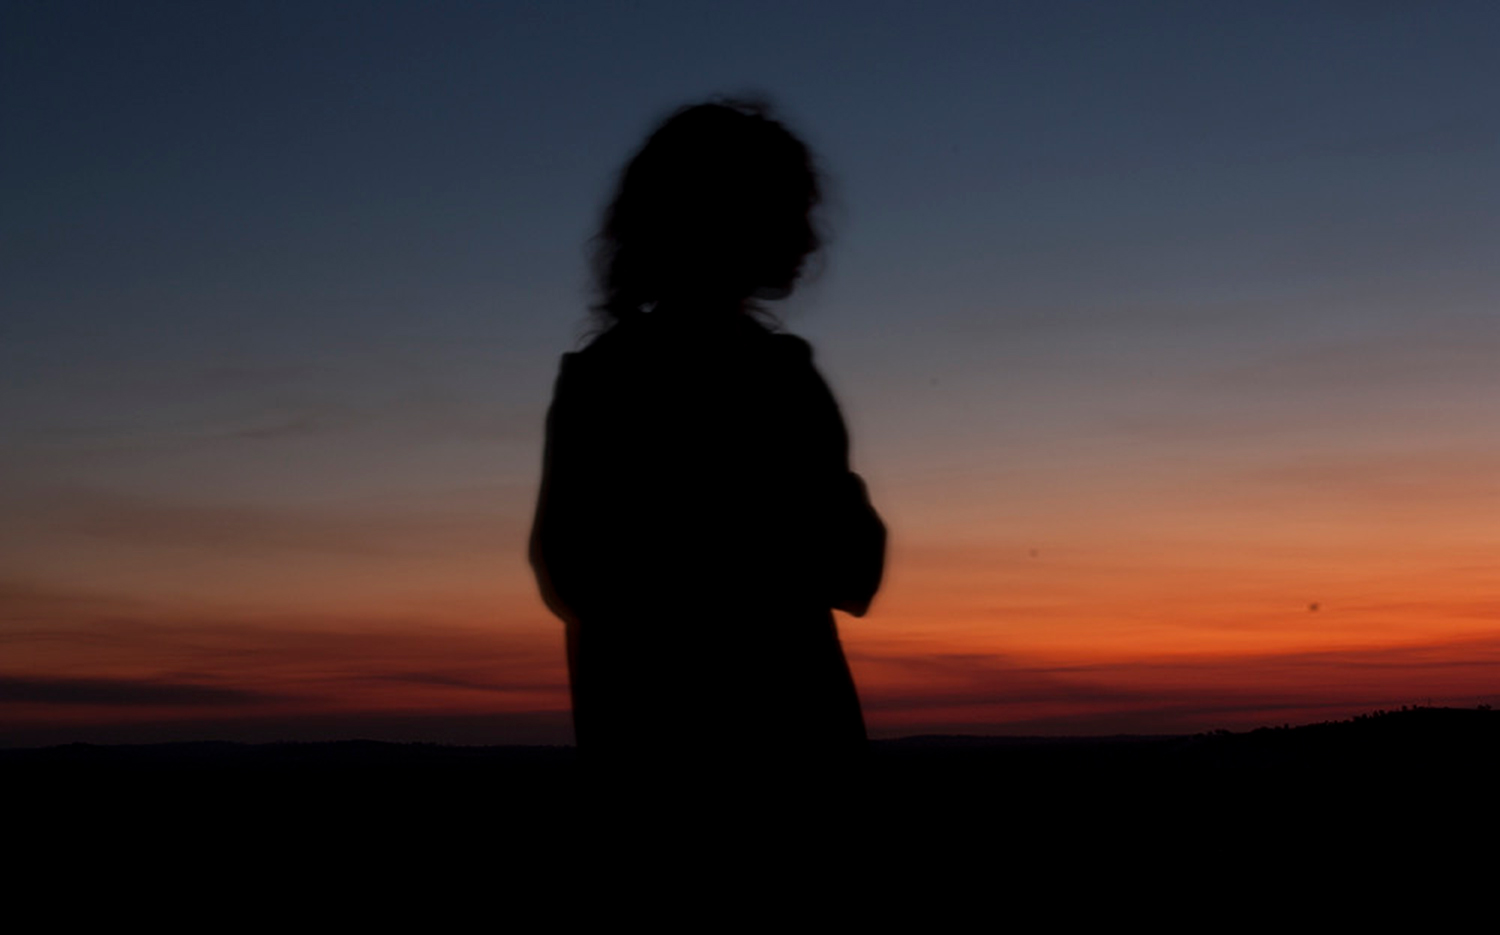 Stock image of woman looking onto the sunset.